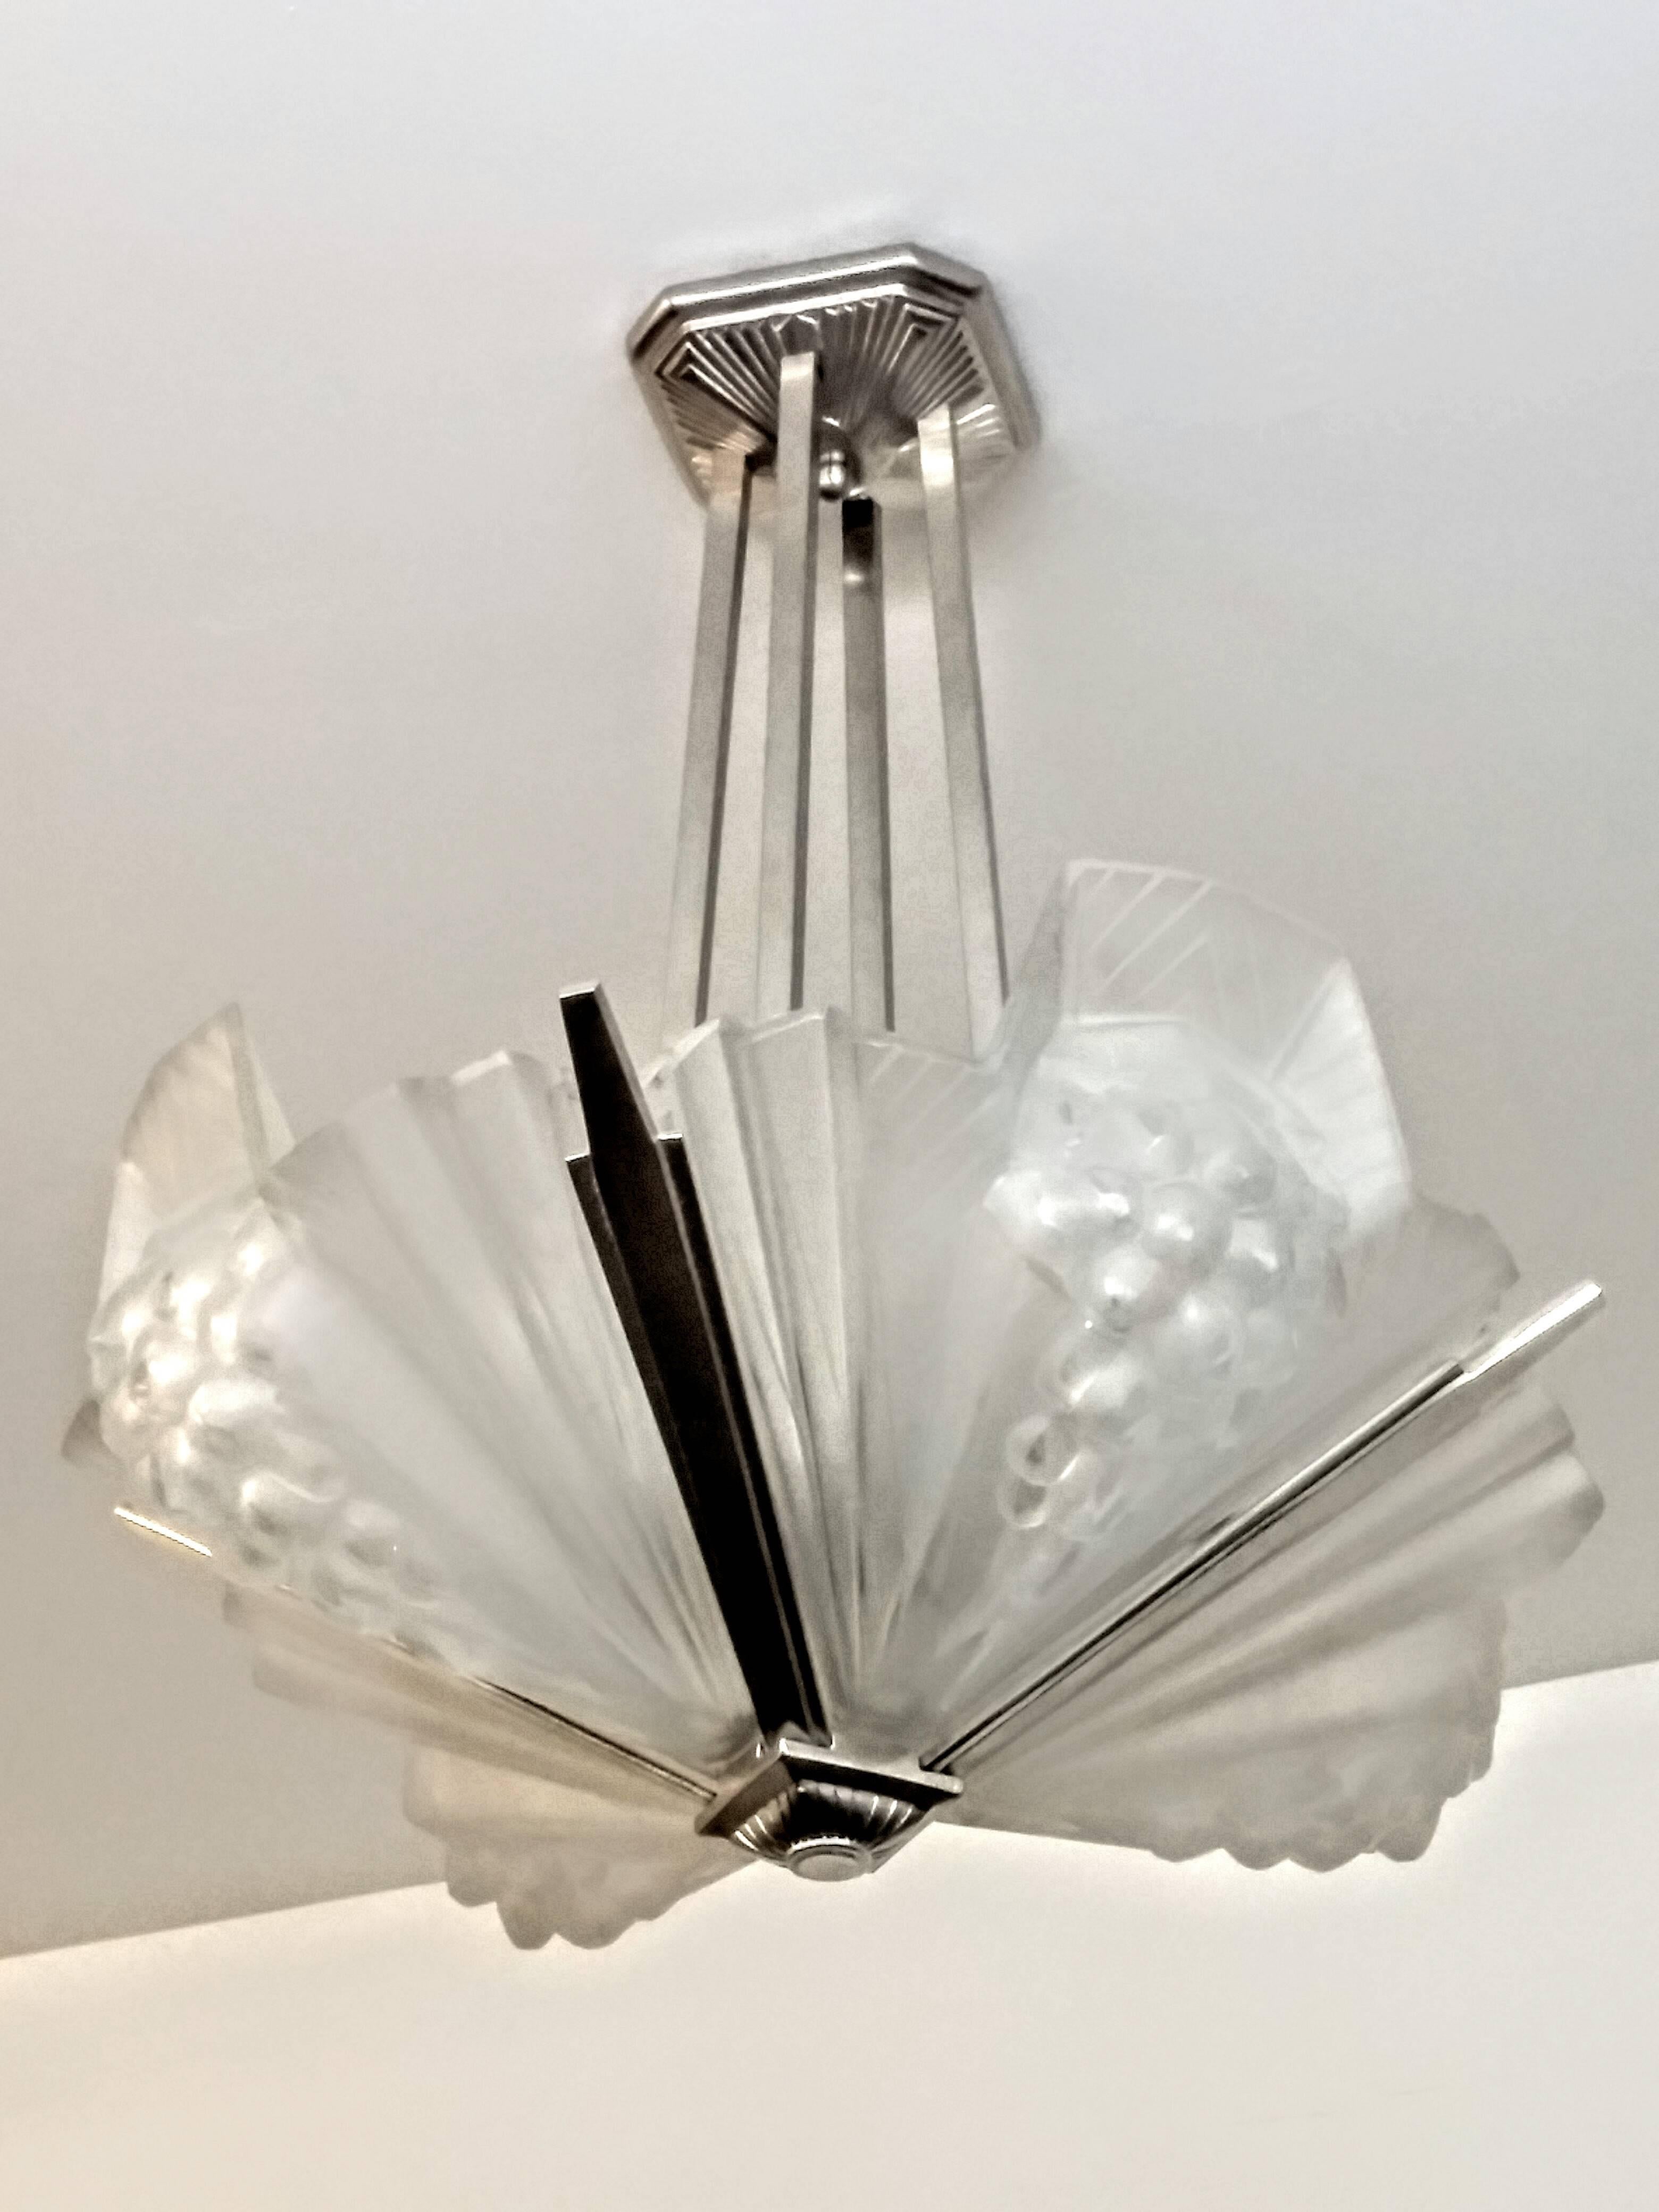 A French Art Deco chandelier by the French artist 